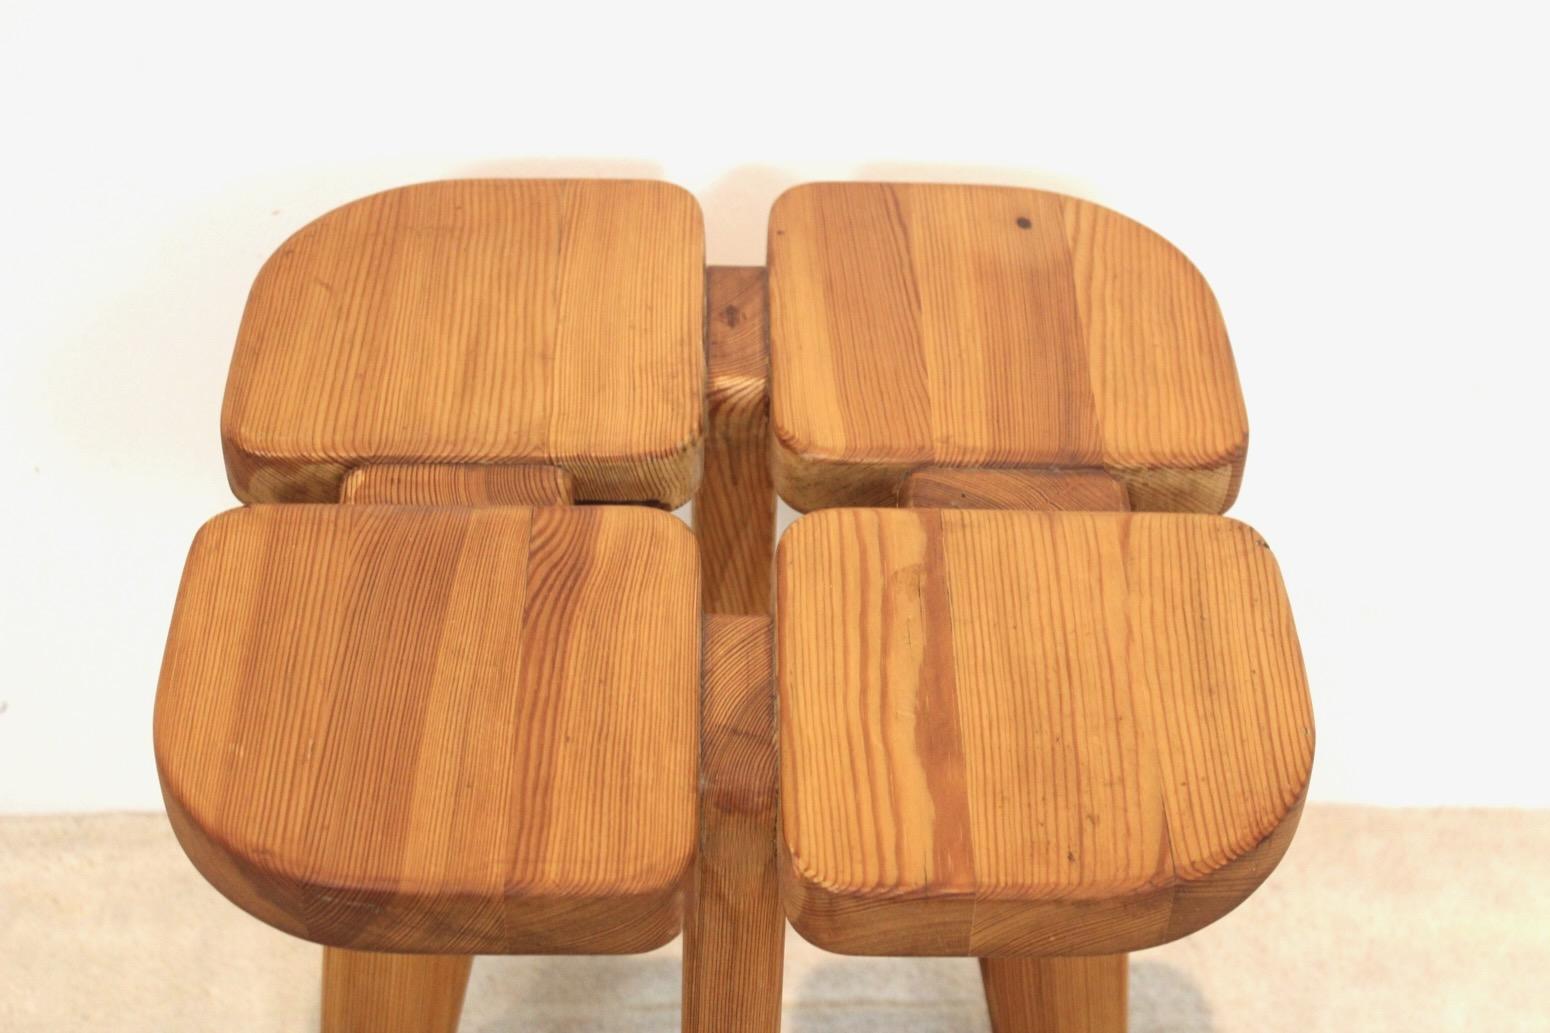 Pine Stunning ‘Apila’ Stool designed by Rauni Peippo and manufactured by Stockmann Or For Sale